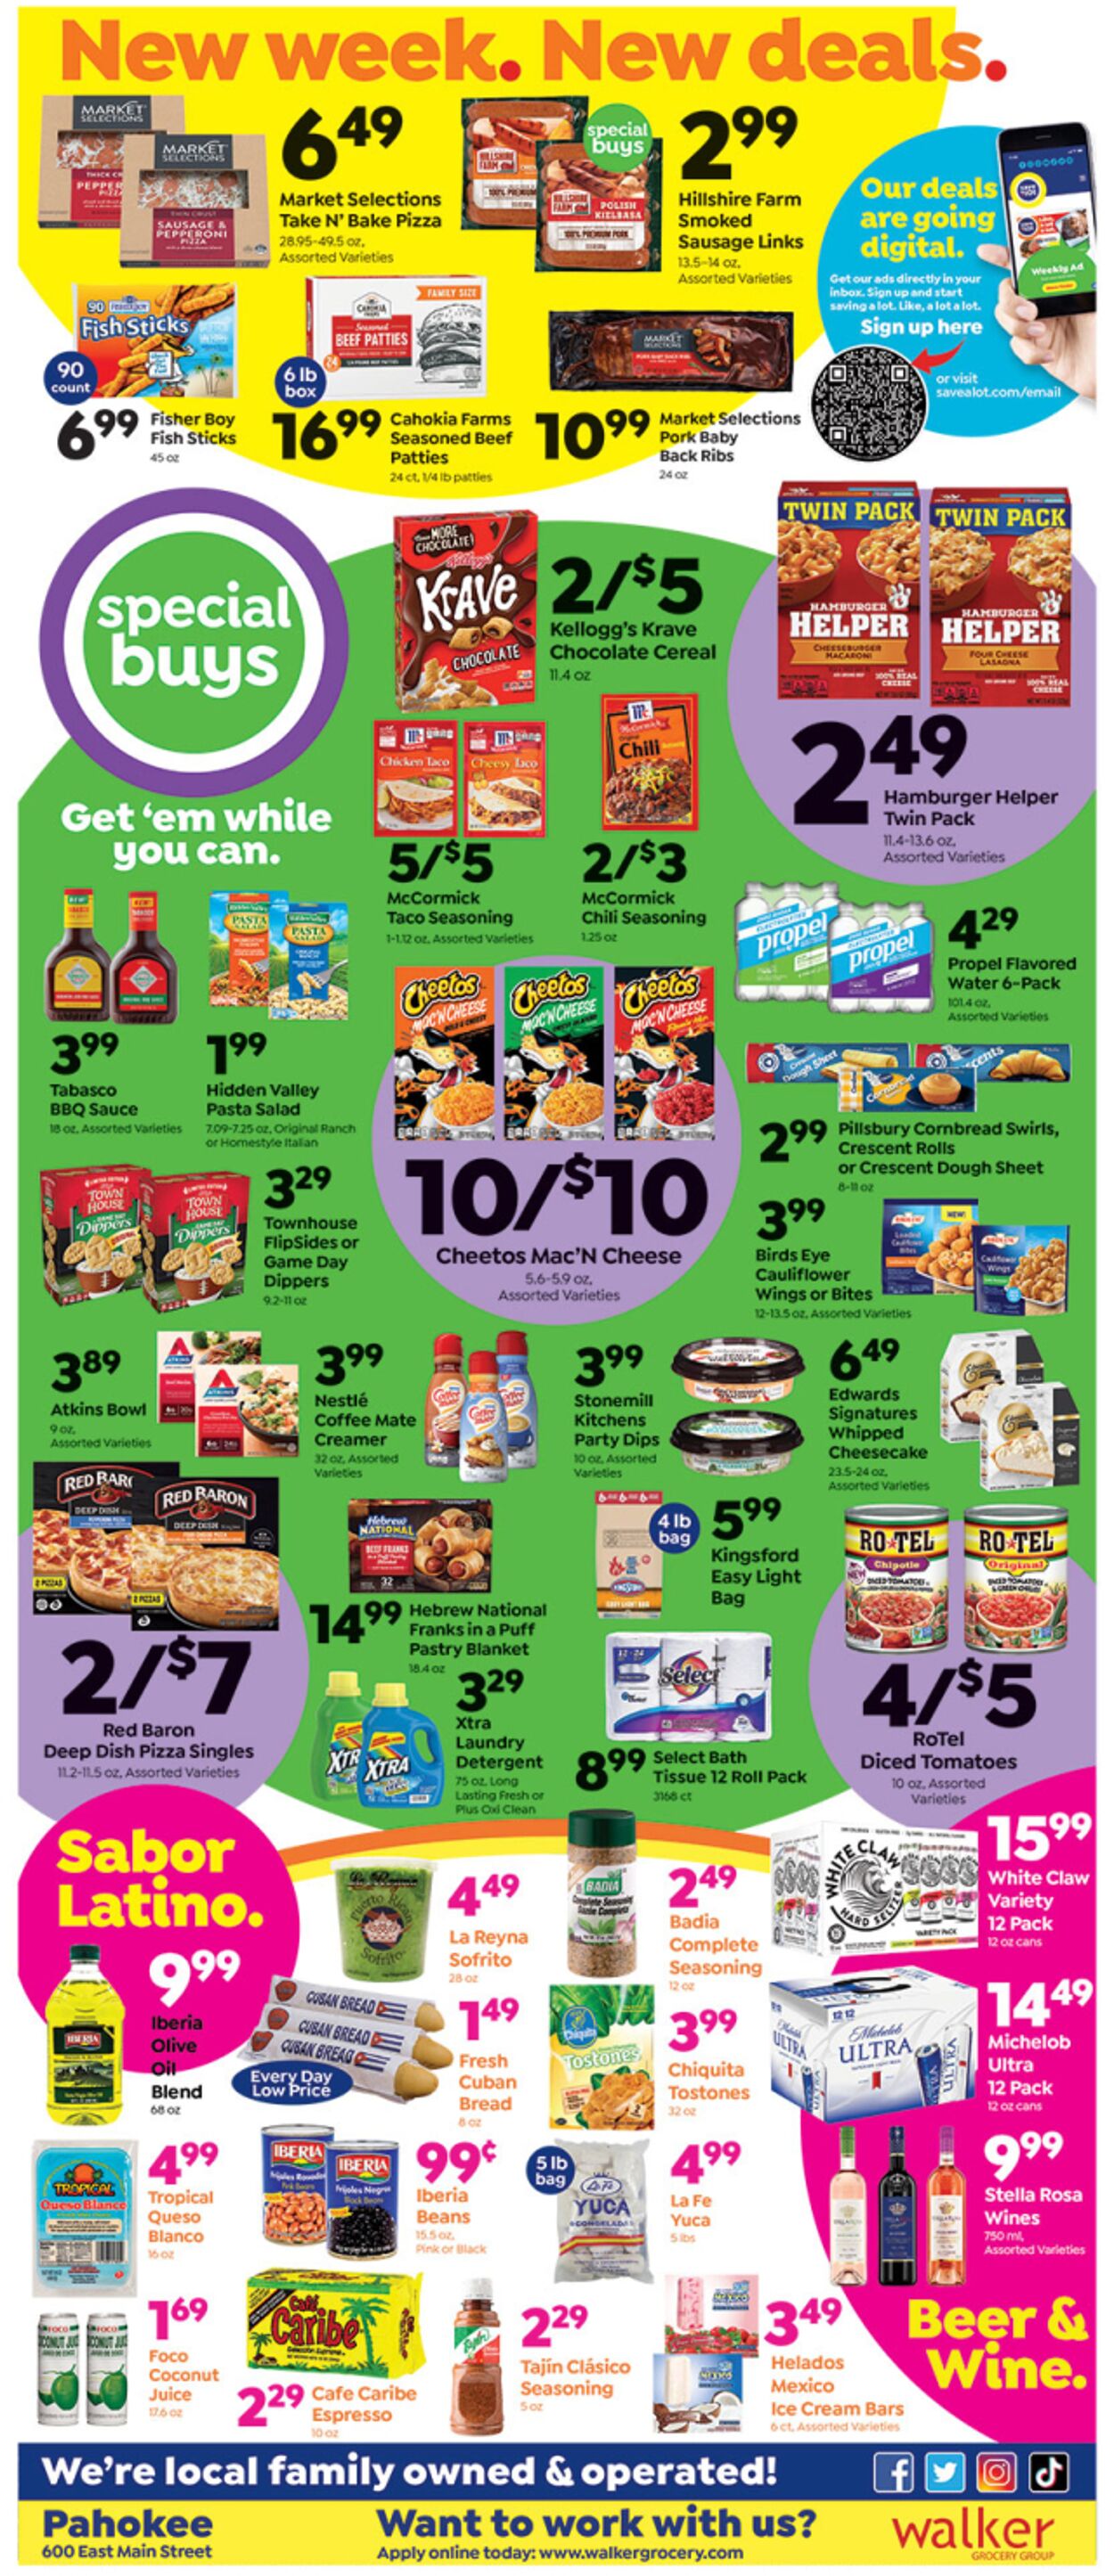 Weekly ad Save a Lot 09/07/2022 - 09/13/2022